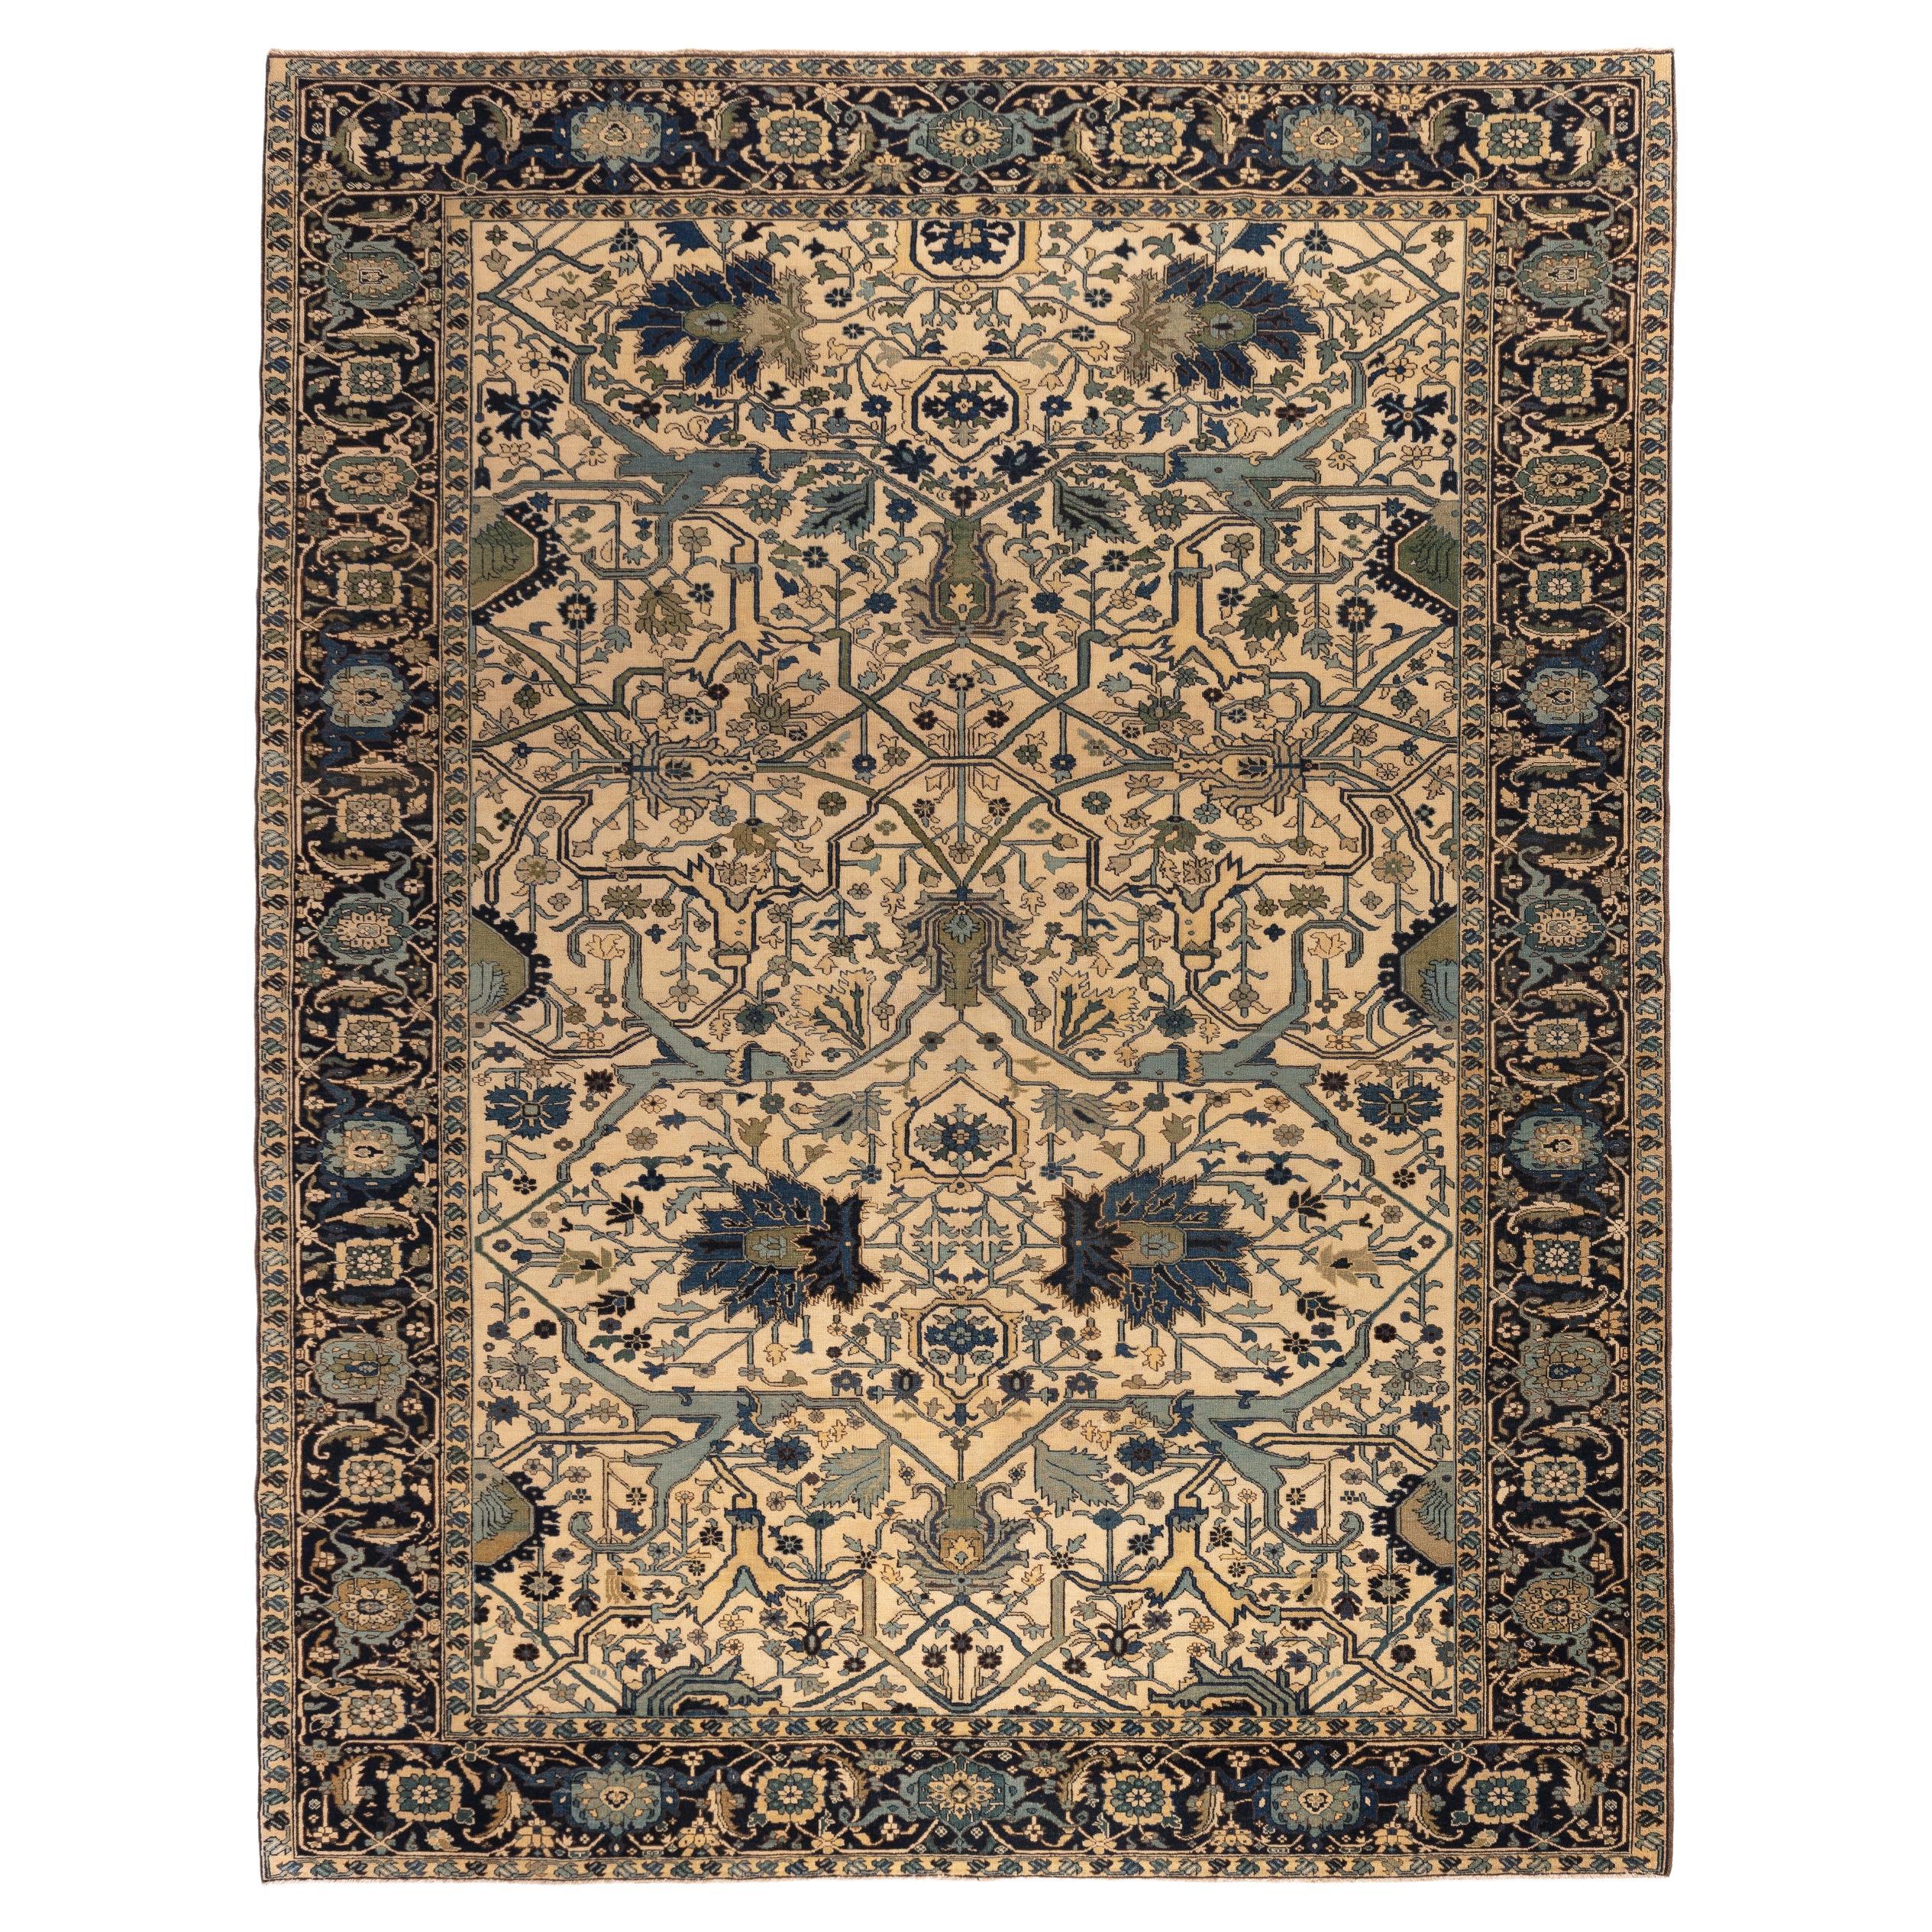 Ararat Rugs Gerous Arabesque Rug, 19th Century Revival Carpet, Natural Dyed For Sale